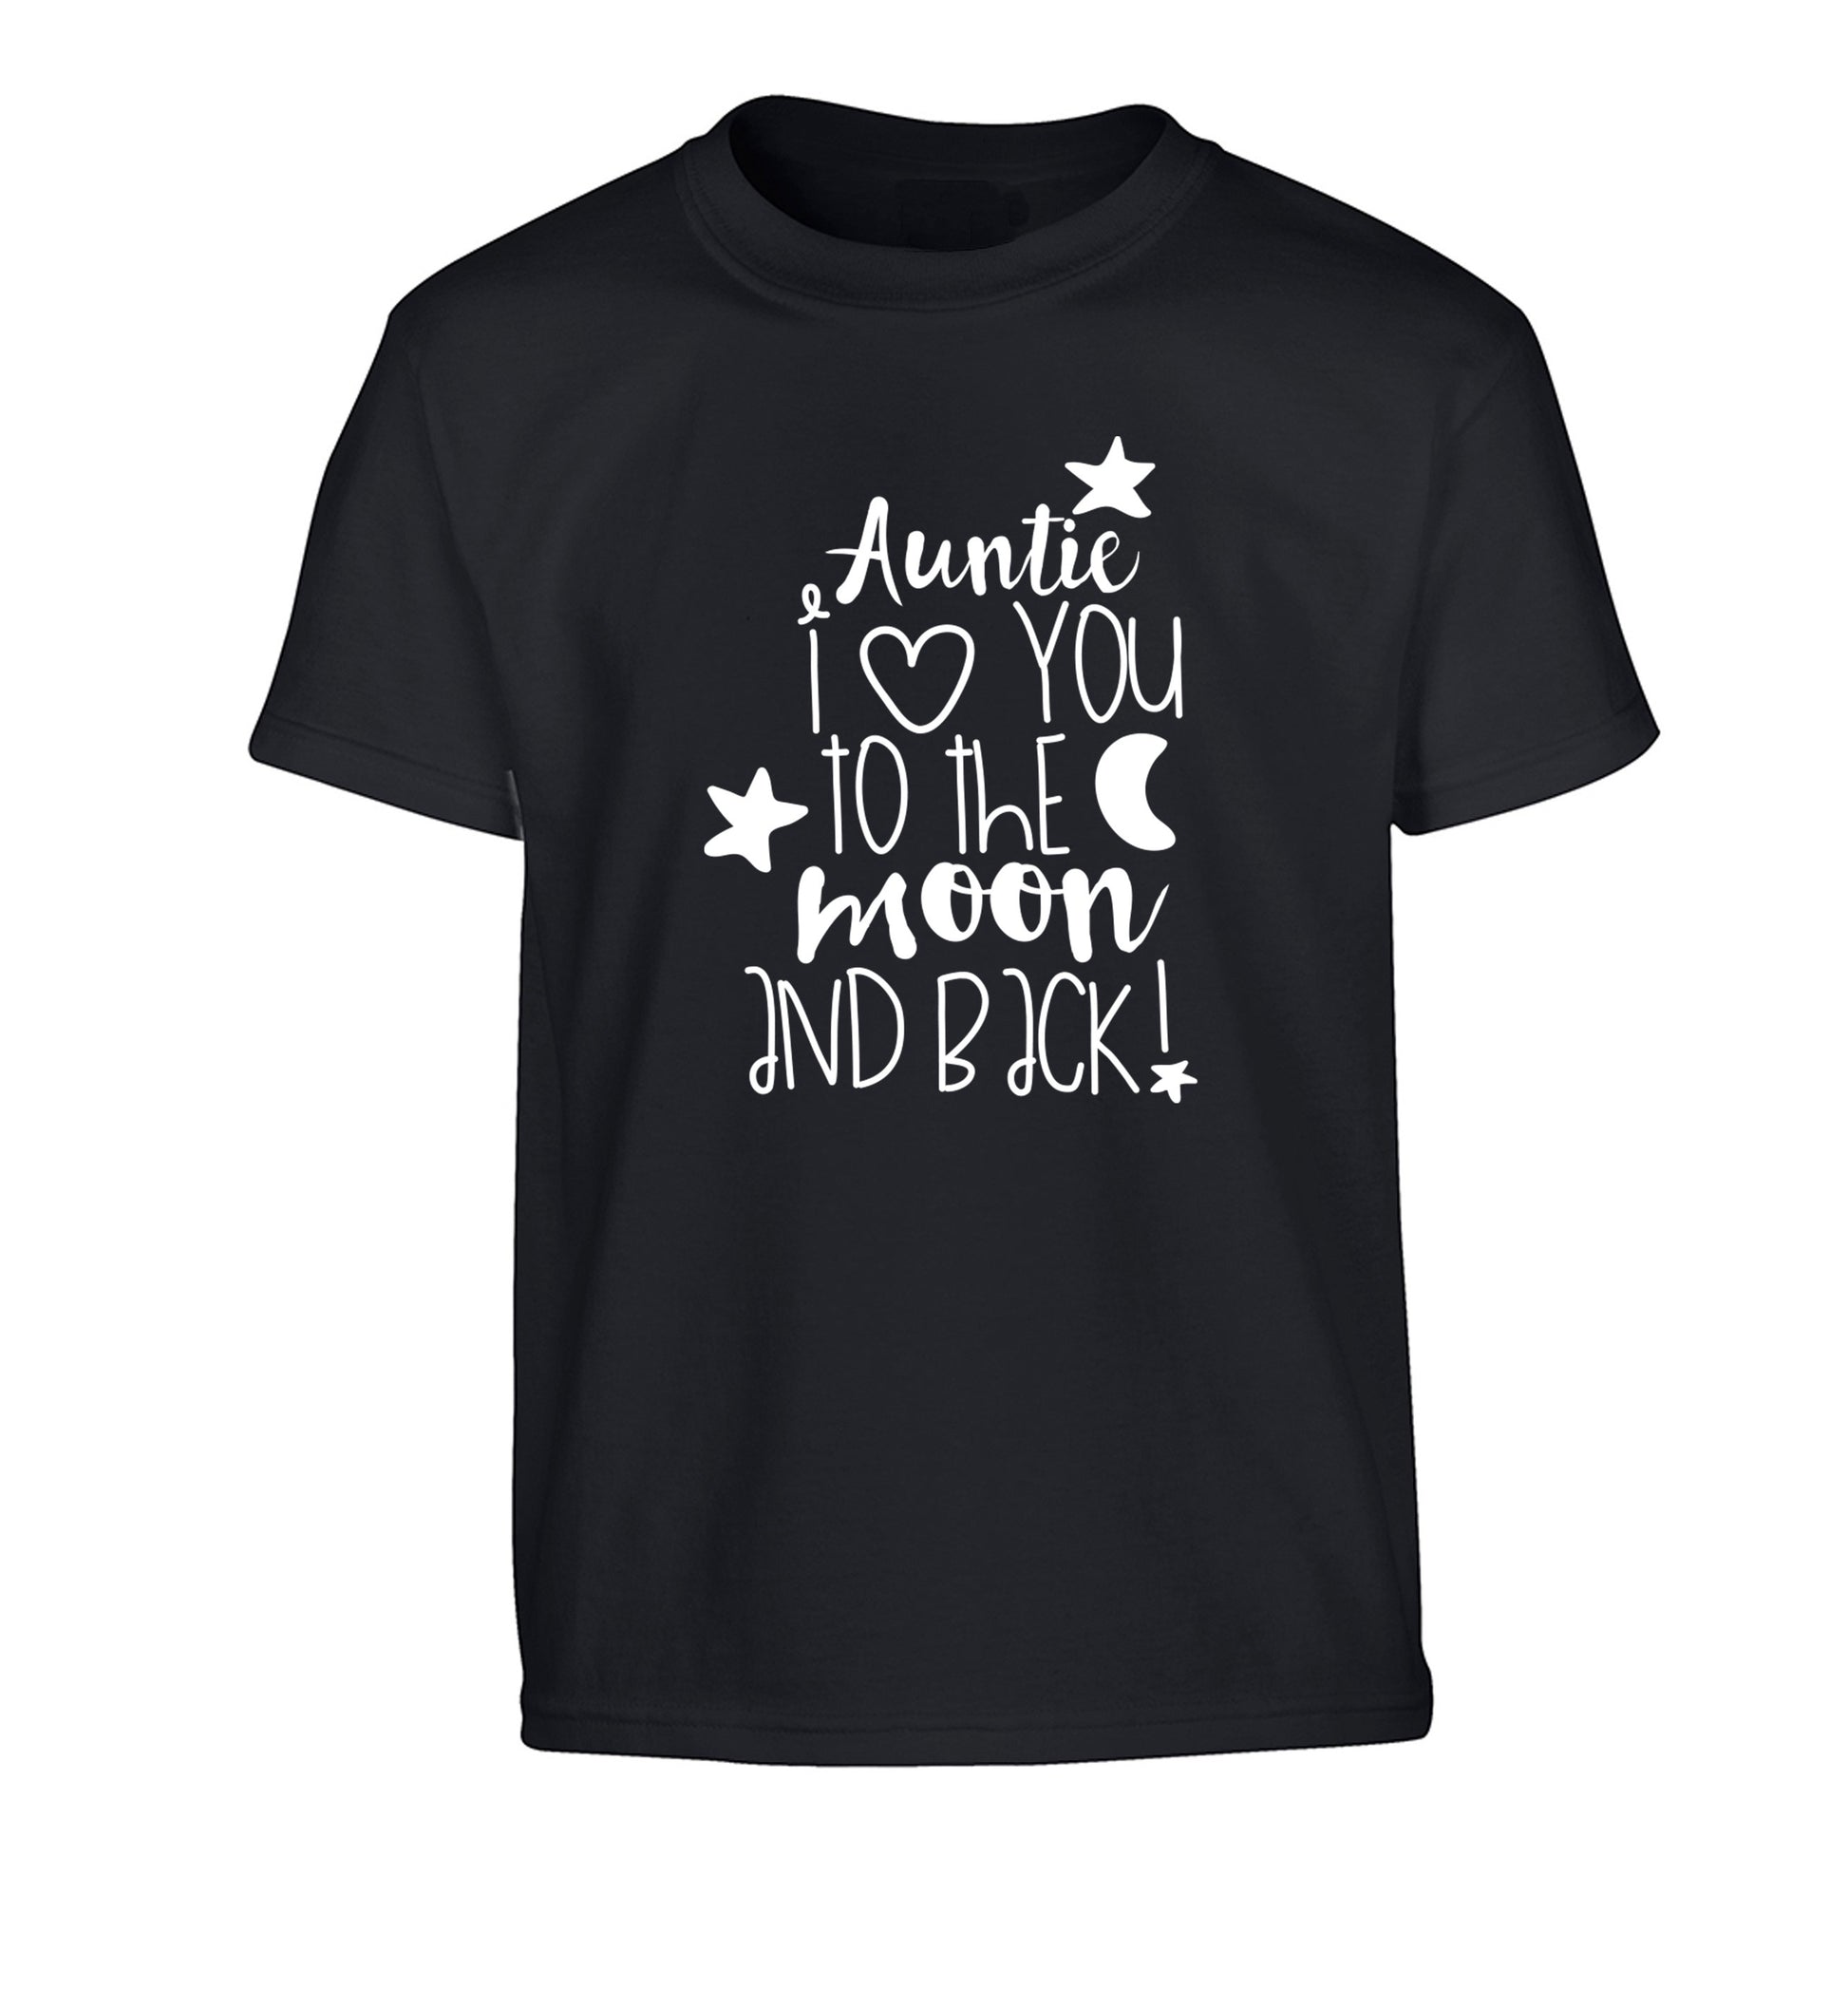 Auntie I love you to the moon and back Children's black Tshirt 12-14 Years